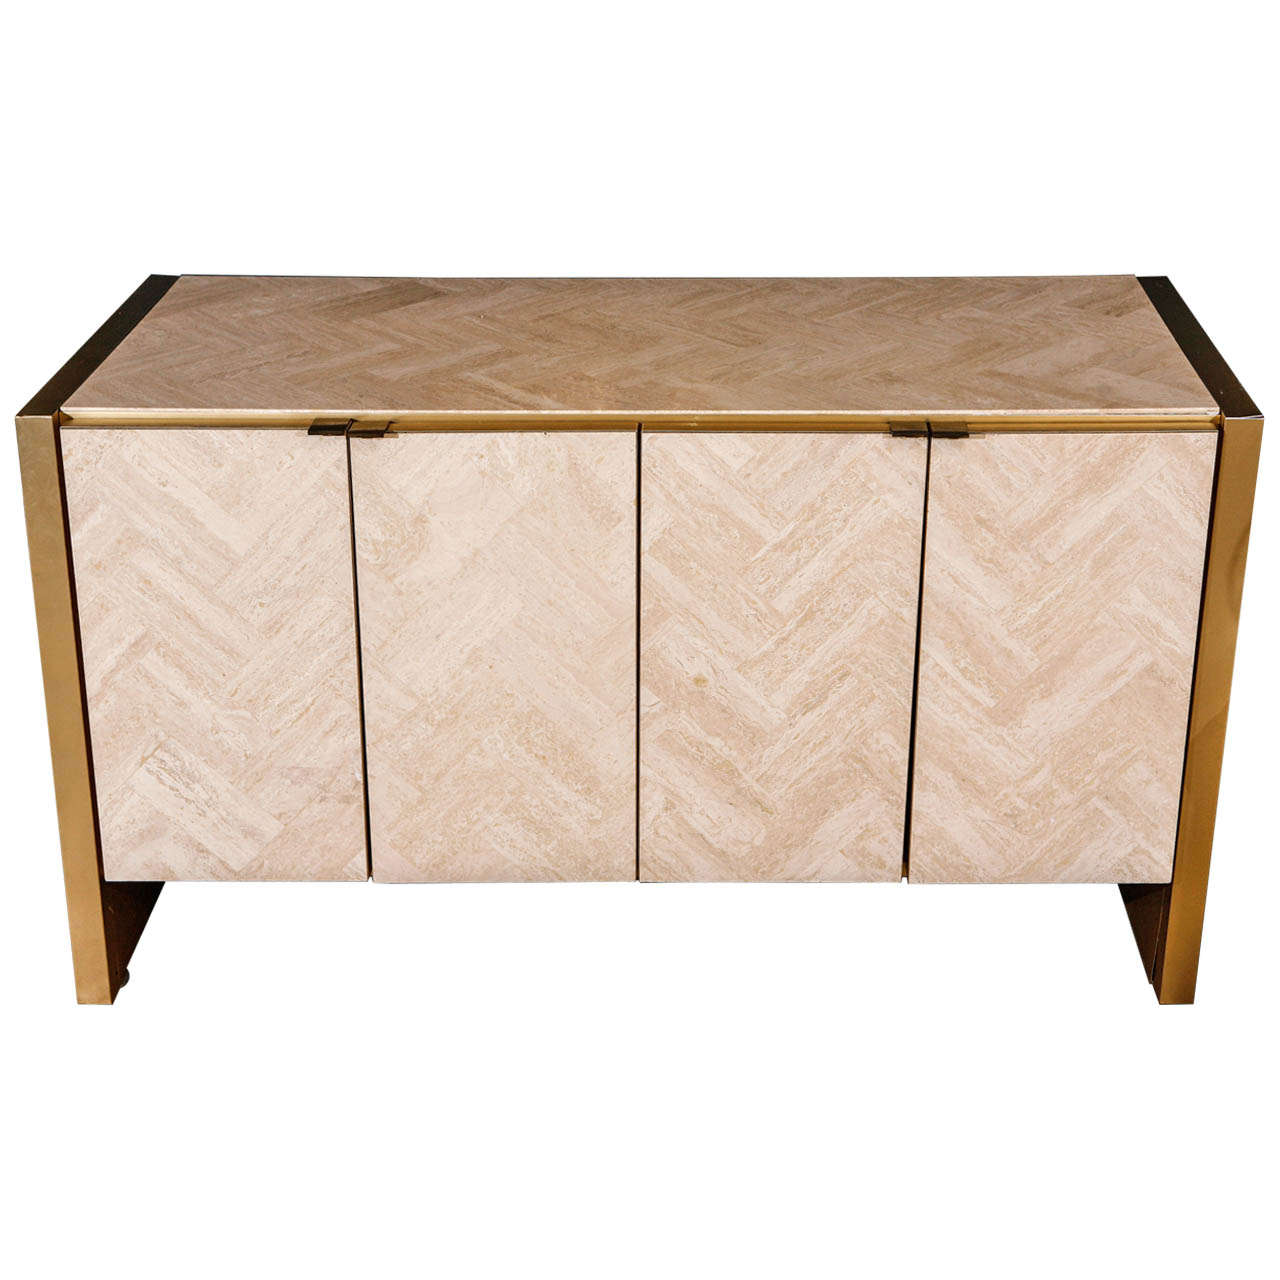 1960's Tessellated Stone Credenza For Sale